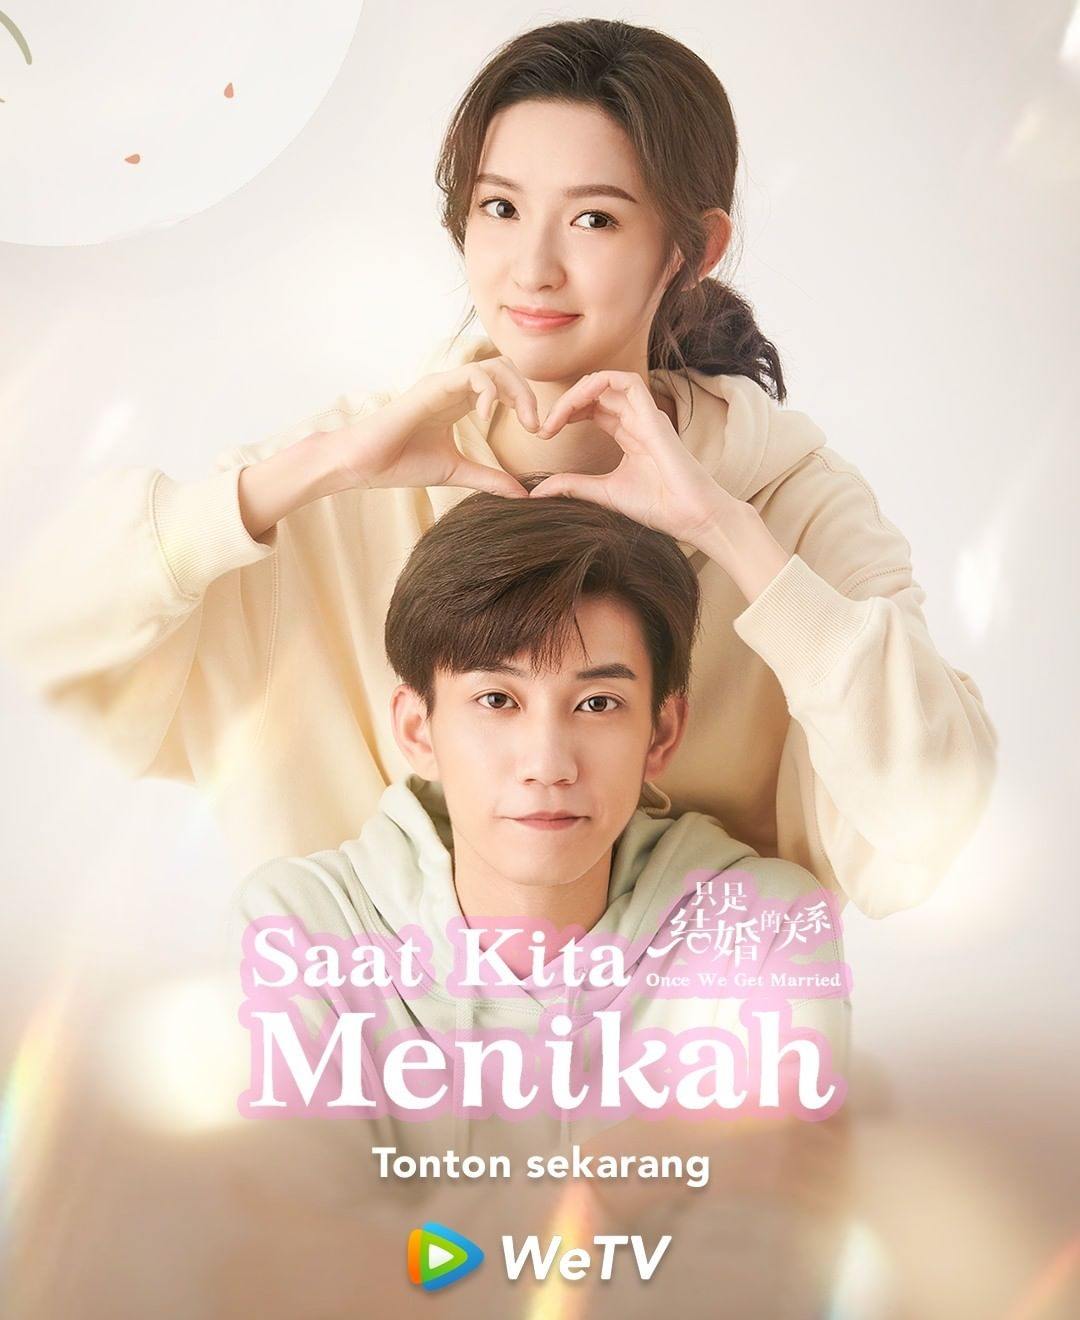 Once We Get Married - Sinopsis, Pemain, OST, Episode, Review